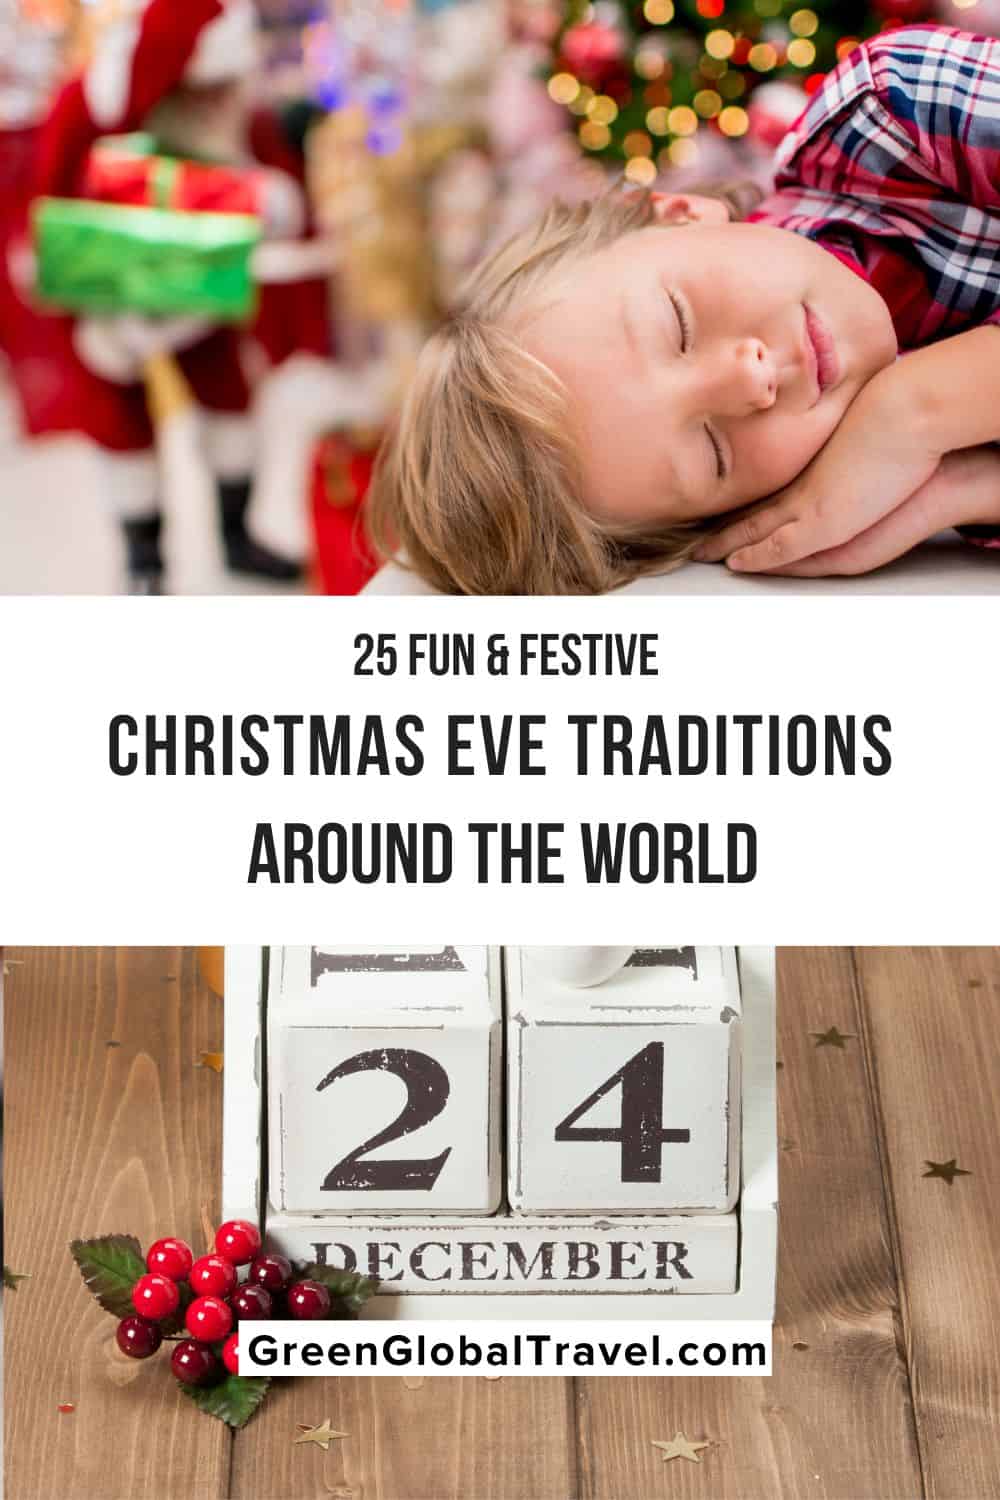 25 Fun Christmas Eve Traditions Around the World including traditions in Australia, China, Iceland, Ireland, Italy, France and more! | traditions for christmas eve | traditional christmas eve | things to do on christmas eve | christmas eve in spain | christmas eve dinner traditions | christmas eve ideas | christmas eve activities | christmas eve traditional italian dinner | italian christmas eve traditions | christmas eve italian traditions | christmas eve celebrations |